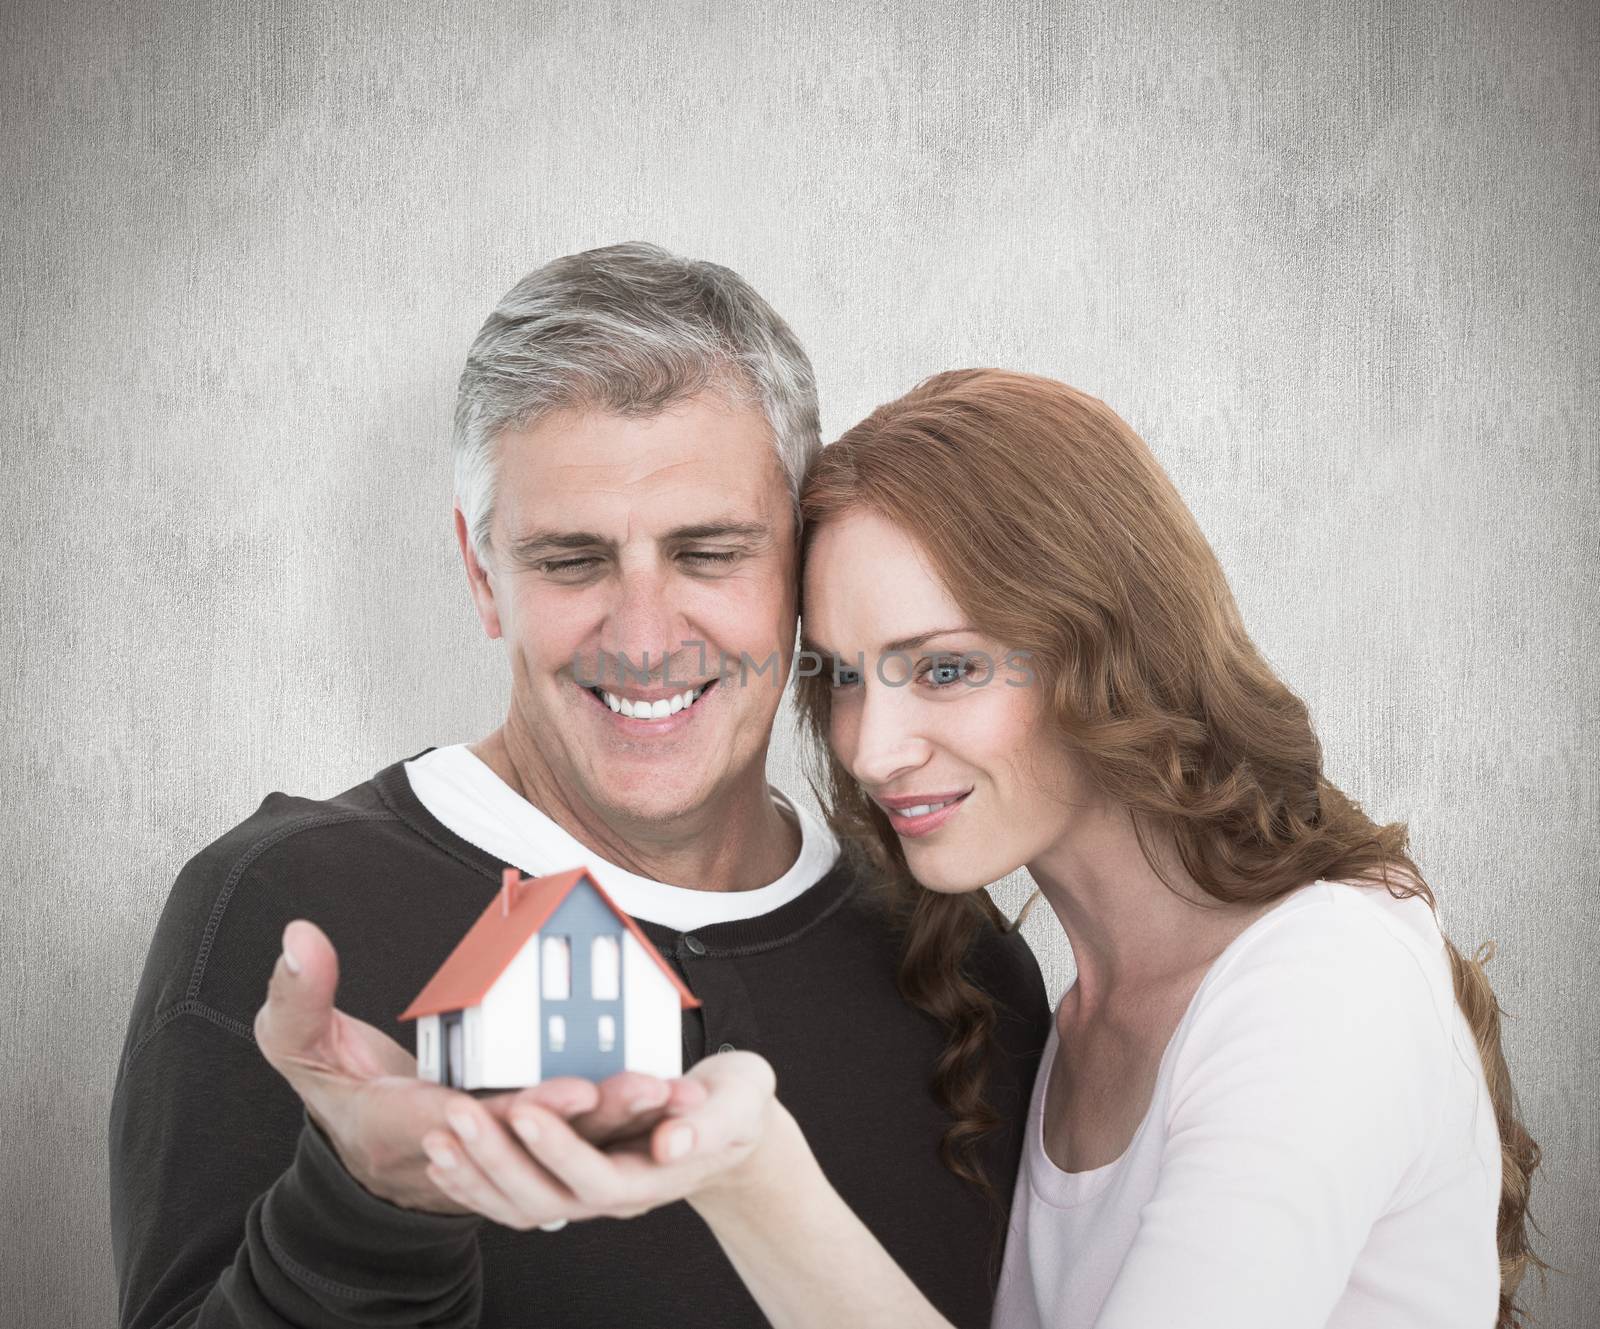 Composite image of casual couple holding small house by Wavebreakmedia